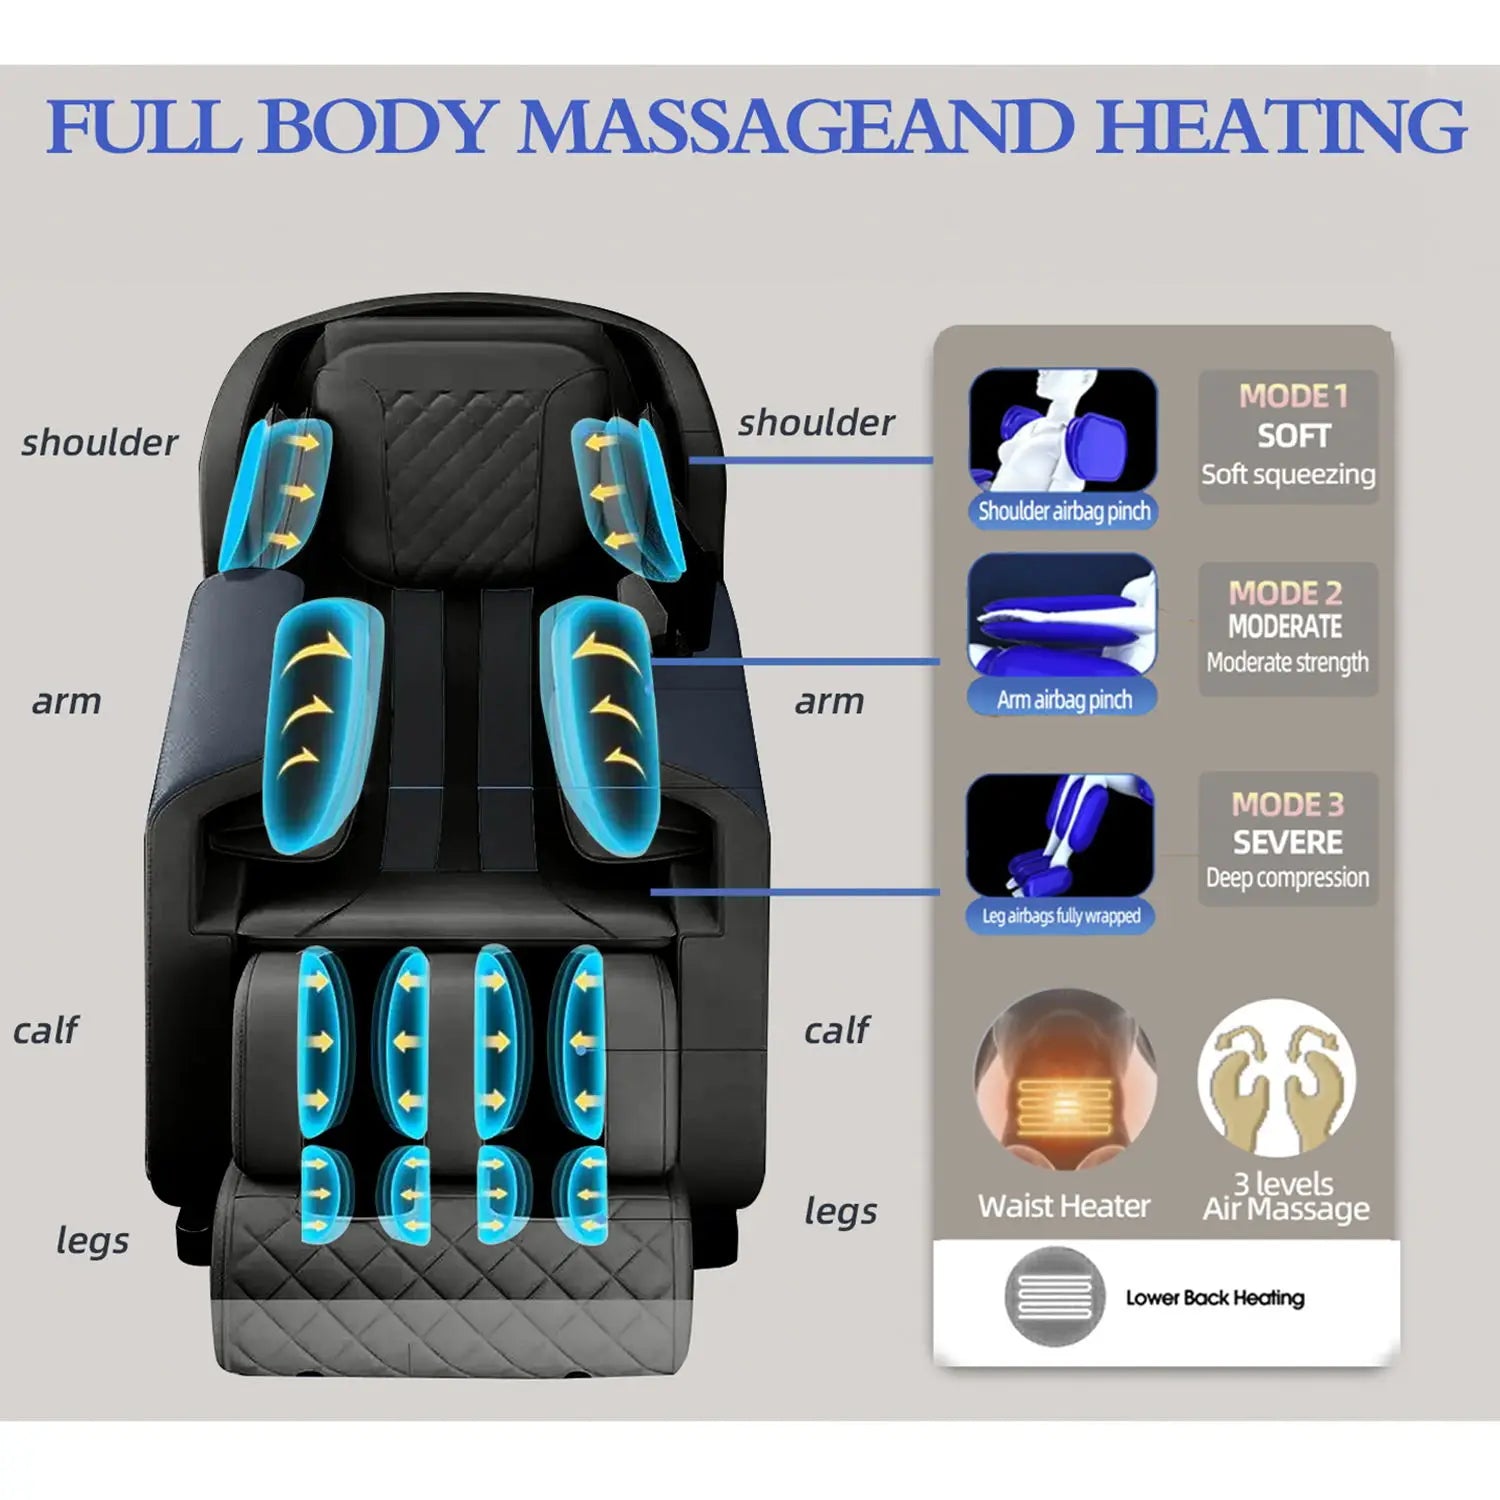 UKLife Automatic Home Full Body Airbag Heating 4D Massage Chairs Electric Zero Gravity SL-Track  Massage Sofa Office Chair